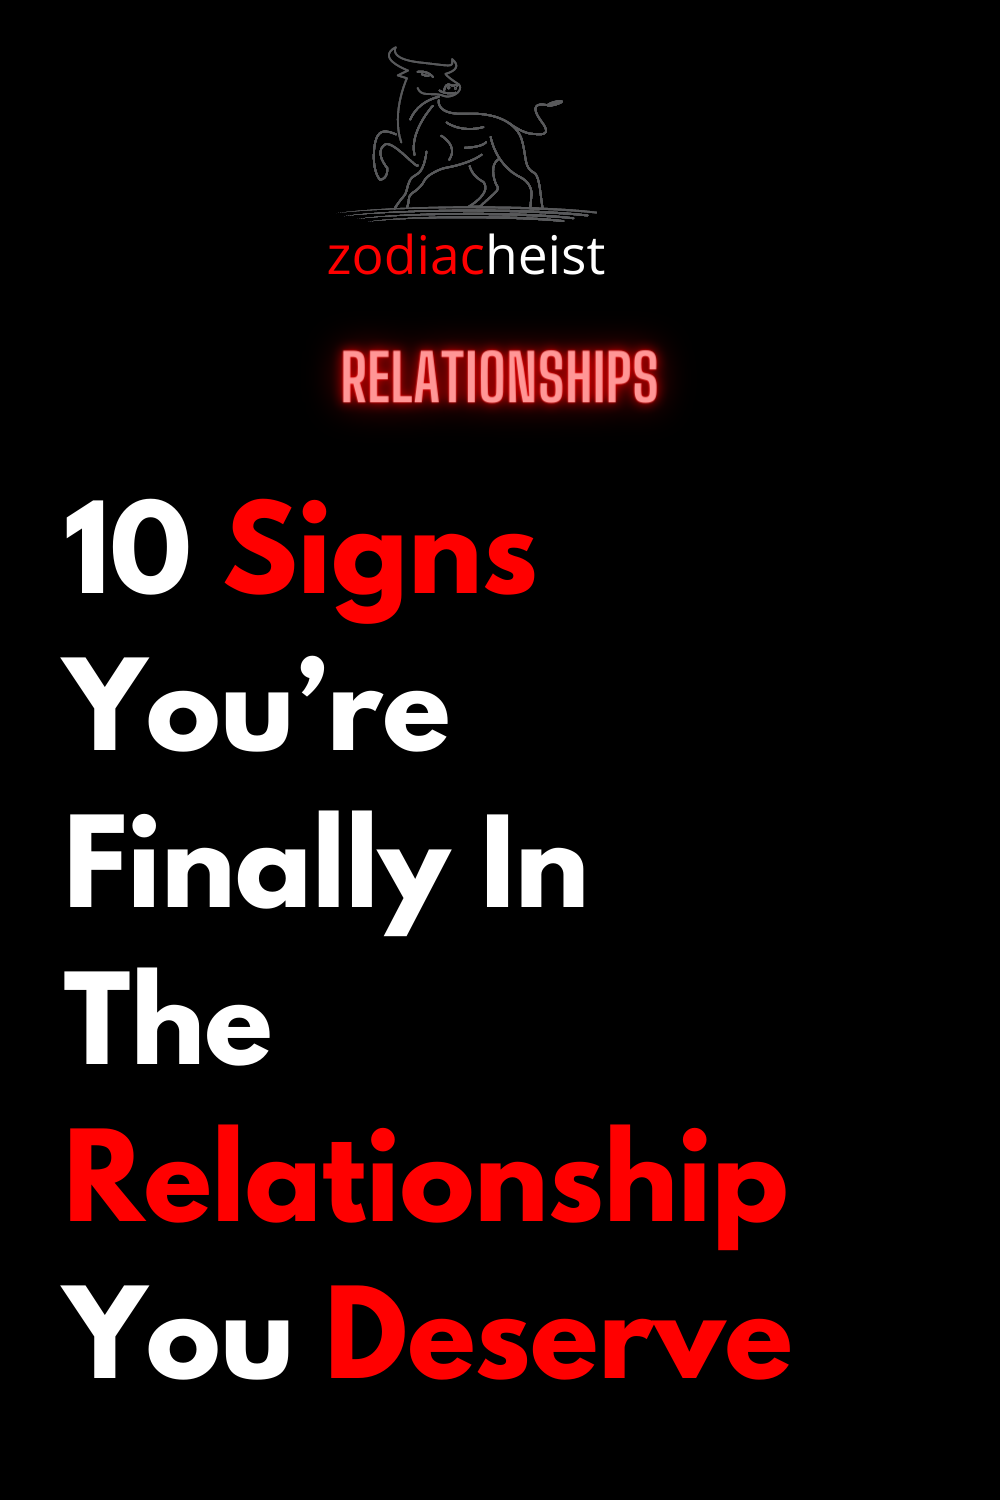 10 Signs You’re Finally In The Relationship You Deserve